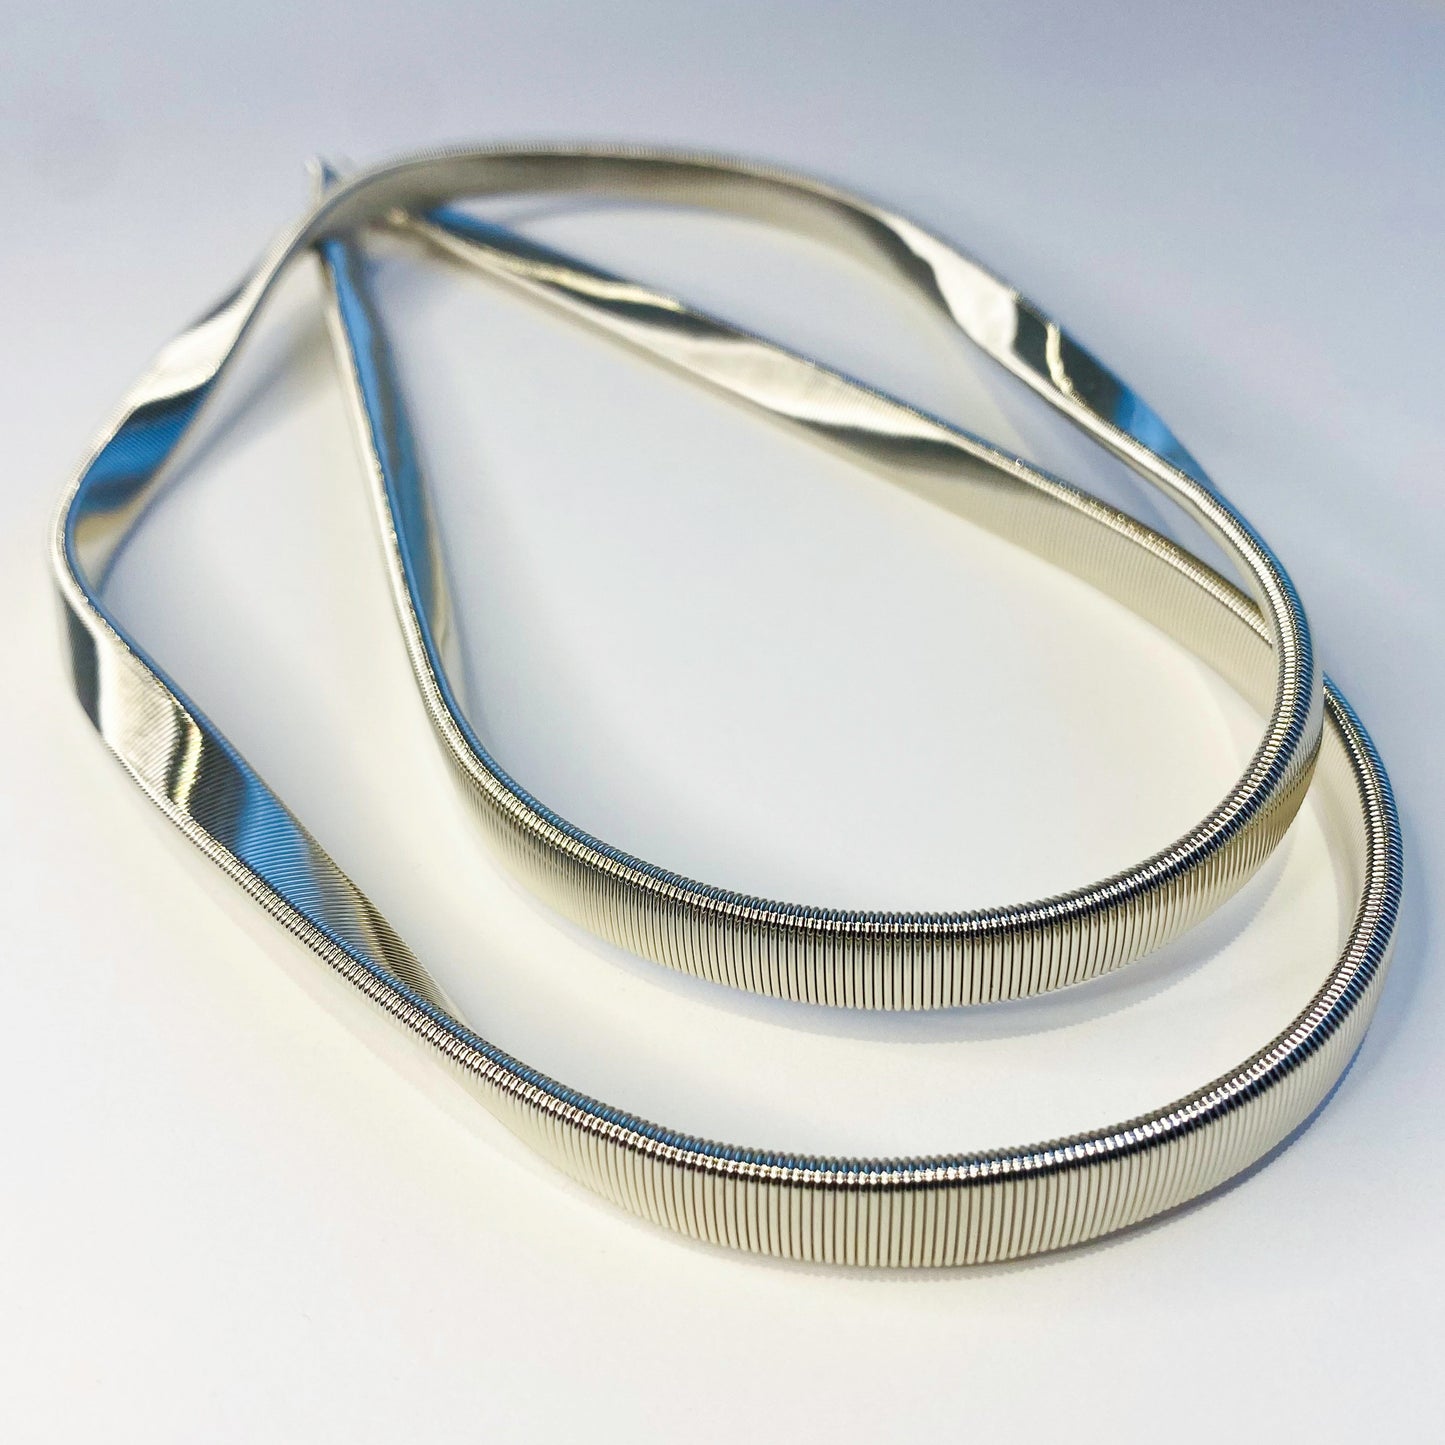 9mm Wide Stretch Metal Bands for Belts or Straps